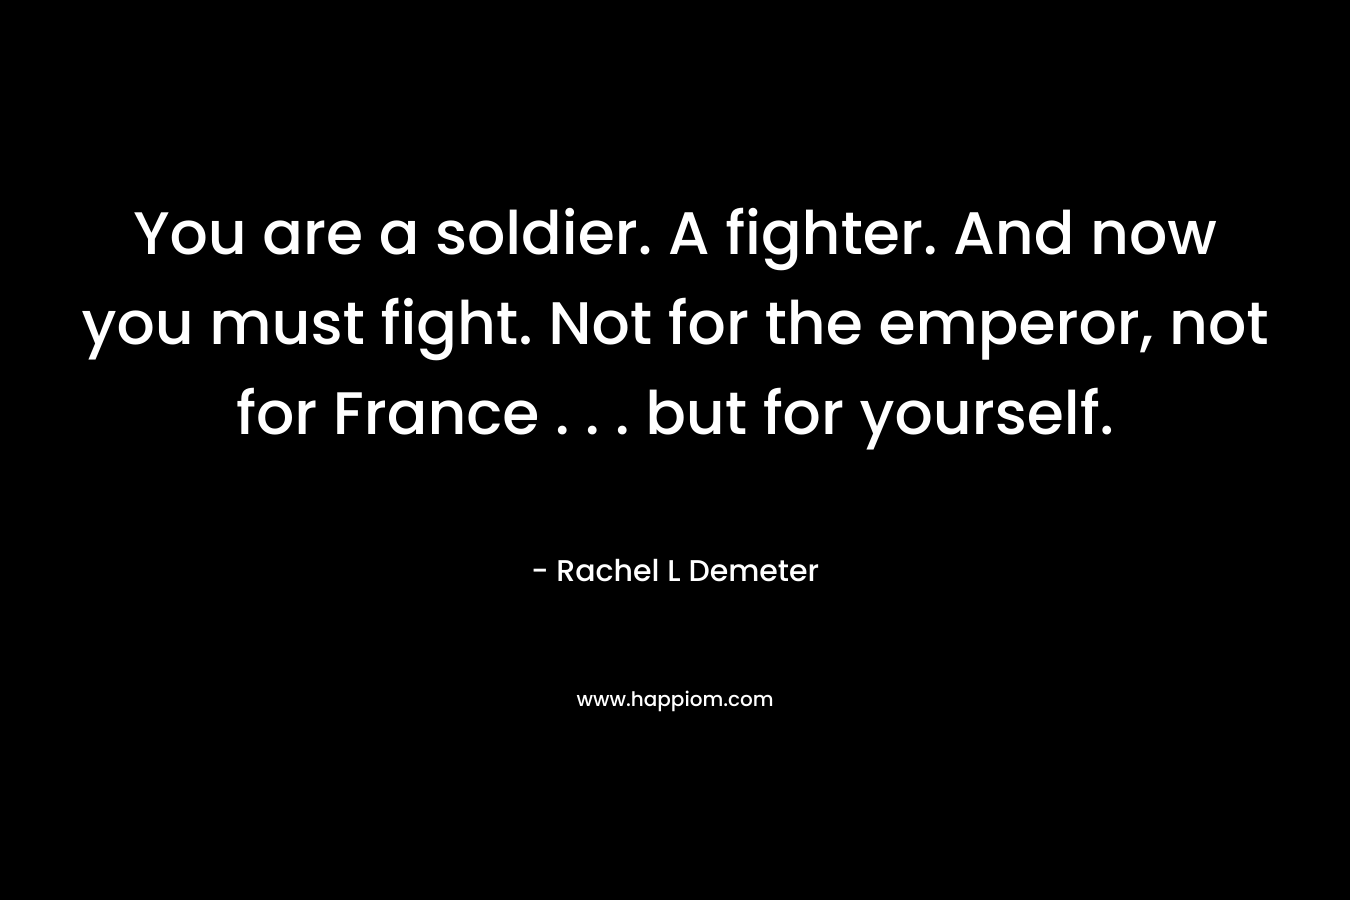 You are a soldier. A fighter. And now you must fight. Not for the emperor, not for France . . . but for yourself. – Rachel L Demeter